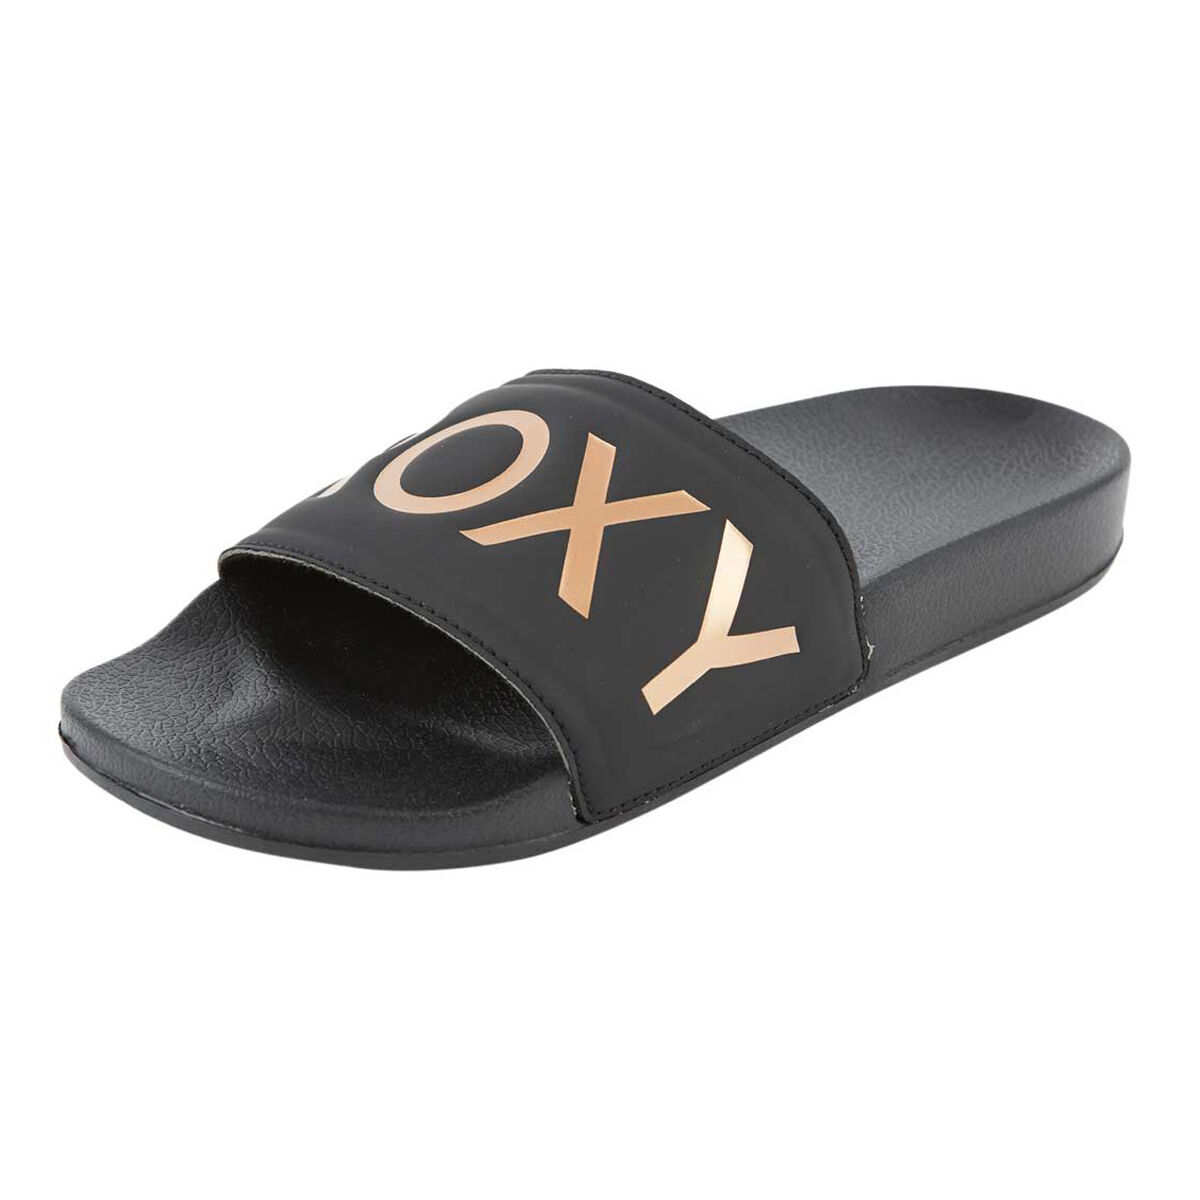 roxy house slippers